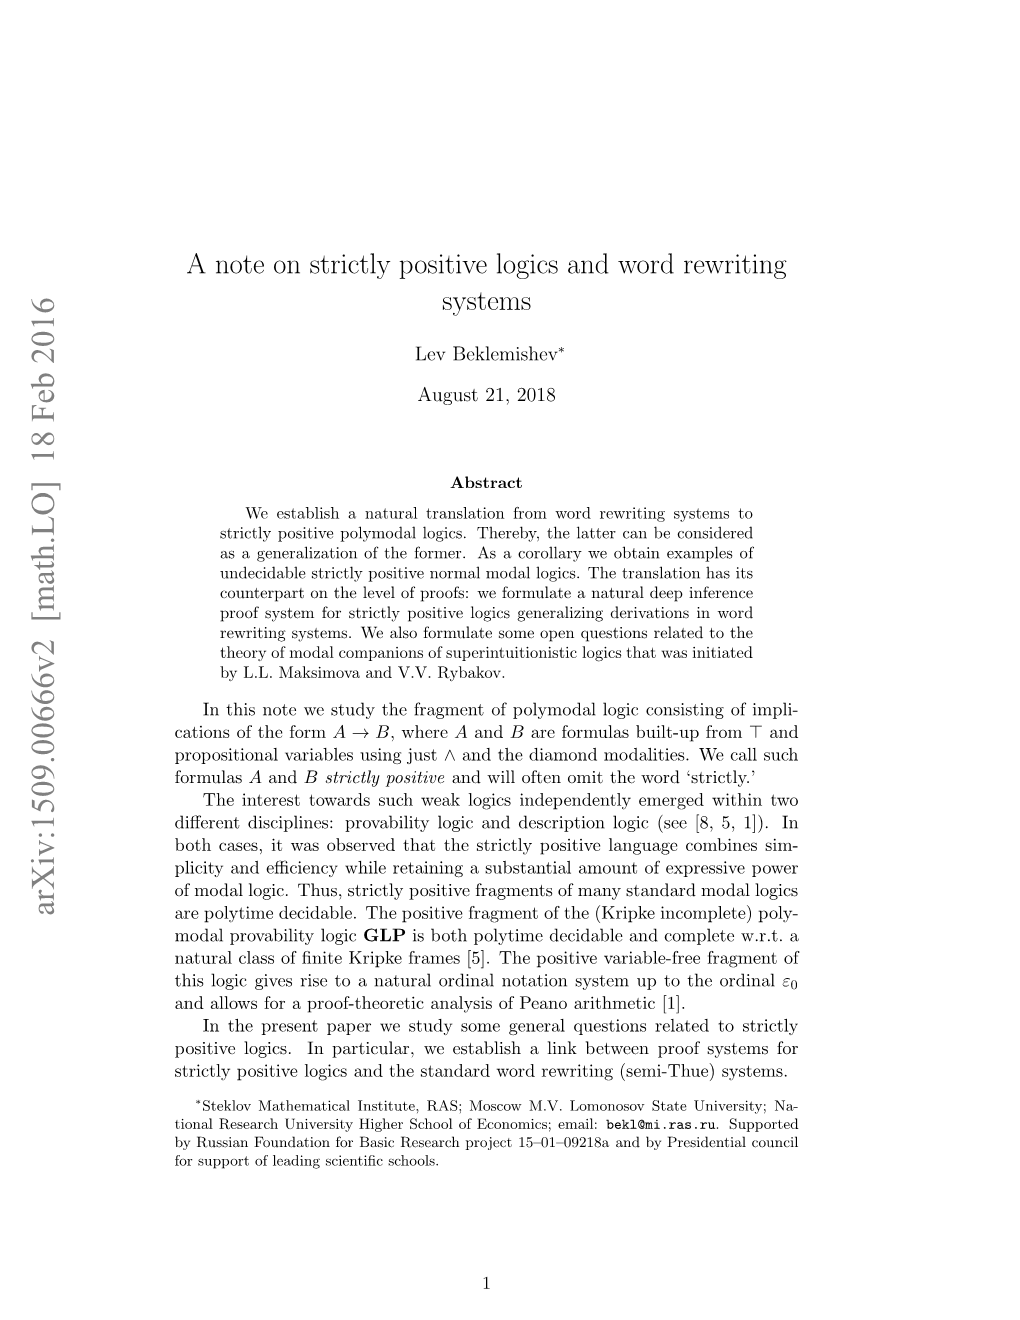 A Note on Strictly Positive Logics and Word Rewriting Systems